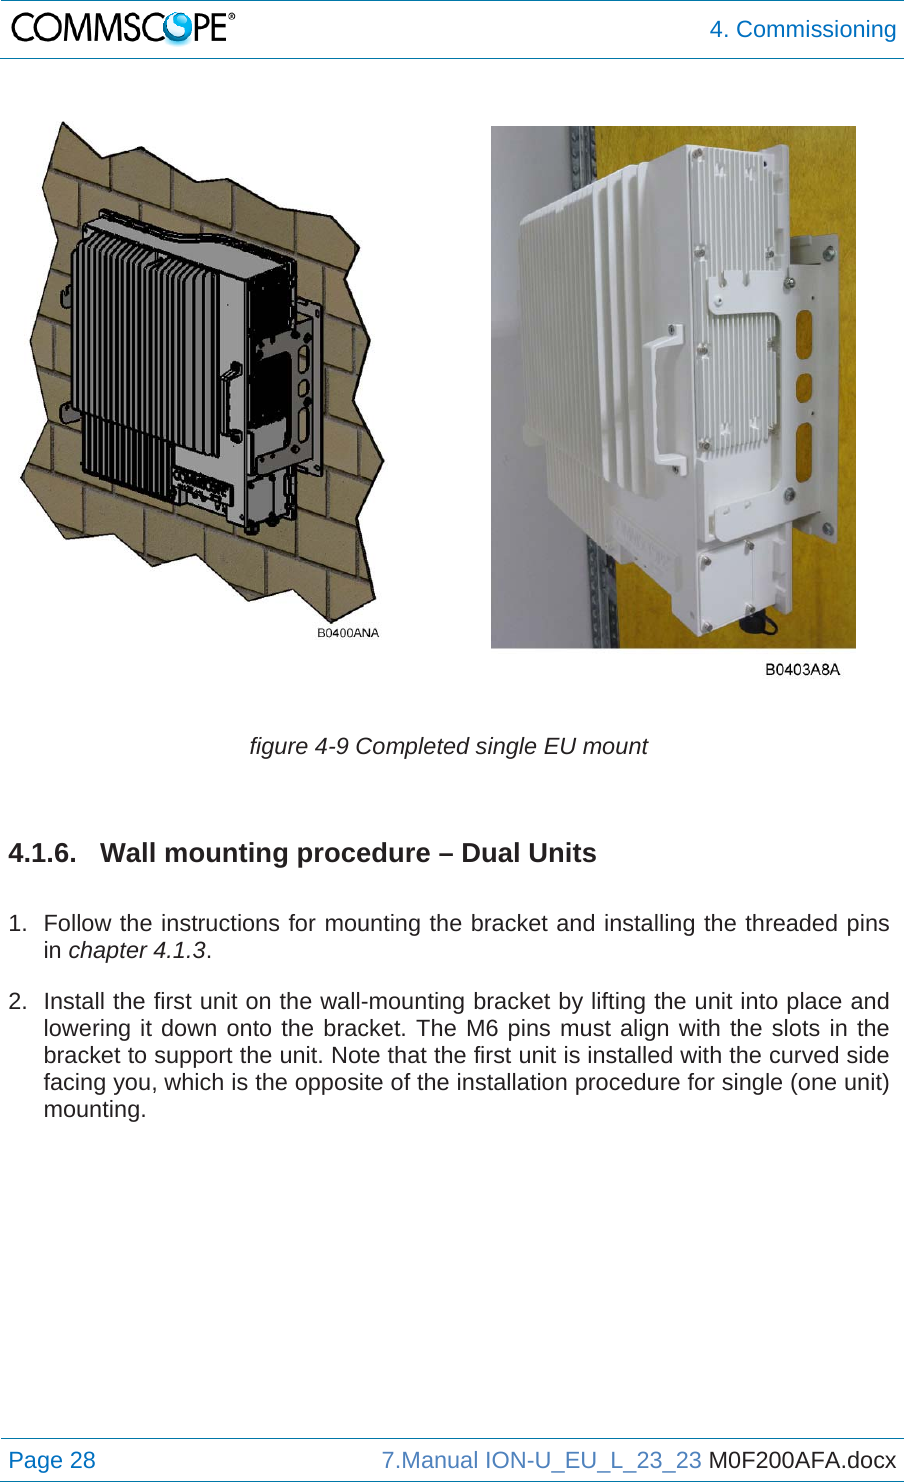  4. Commissioning Page 28  7.Manual ION-U_EU_L_23_23 M0F200AFA.docx    figure 4-9 Completed single EU mount  4.1.6.  Wall mounting procedure – Dual Units  1.  Follow the instructions for mounting the bracket and installing the threaded pins in chapter 4.1.3. 2.  Install the first unit on the wall-mounting bracket by lifting the unit into place and lowering it down onto the bracket. The M6 pins must align with the slots in the bracket to support the unit. Note that the first unit is installed with the curved side facing you, which is the opposite of the installation procedure for single (one unit) mounting. 